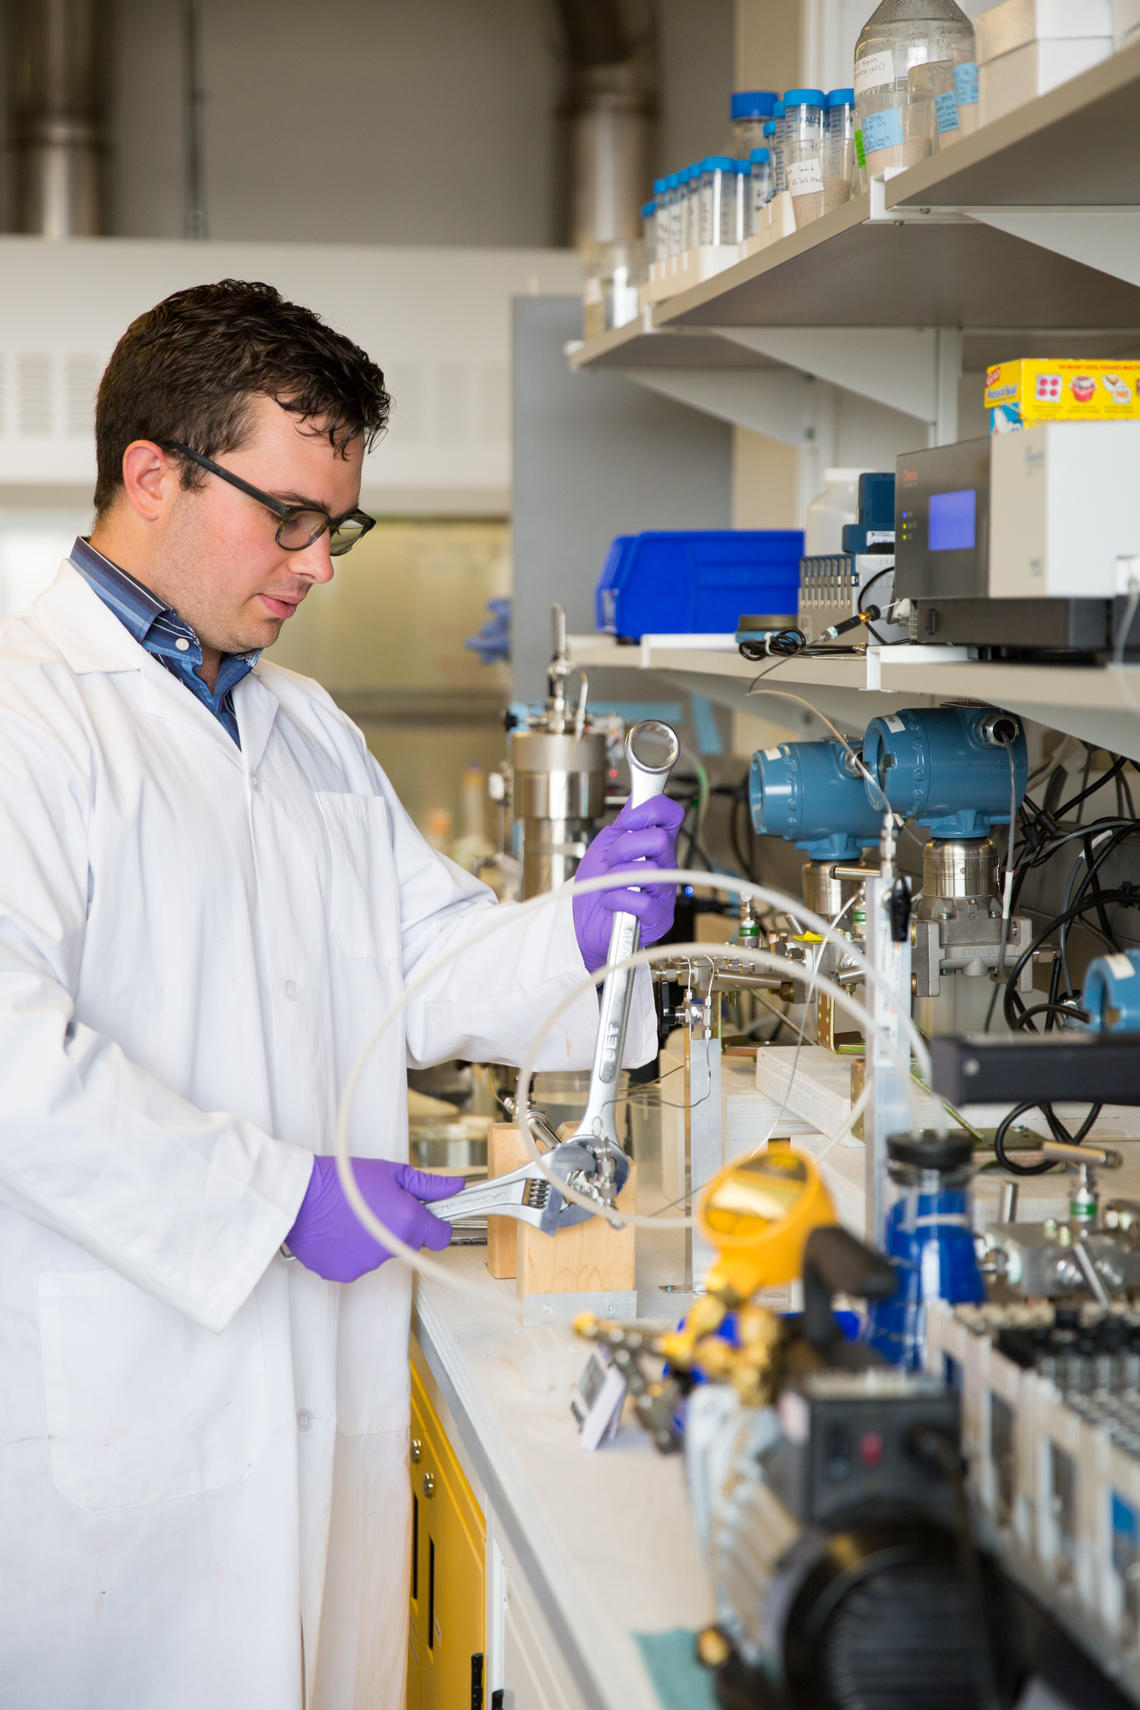 Graduate student Carter Dzuiba researched nanocellulose technology in Steven Bryant’s lab to improve enhanced oil recovery and make it more environmentally friendly.